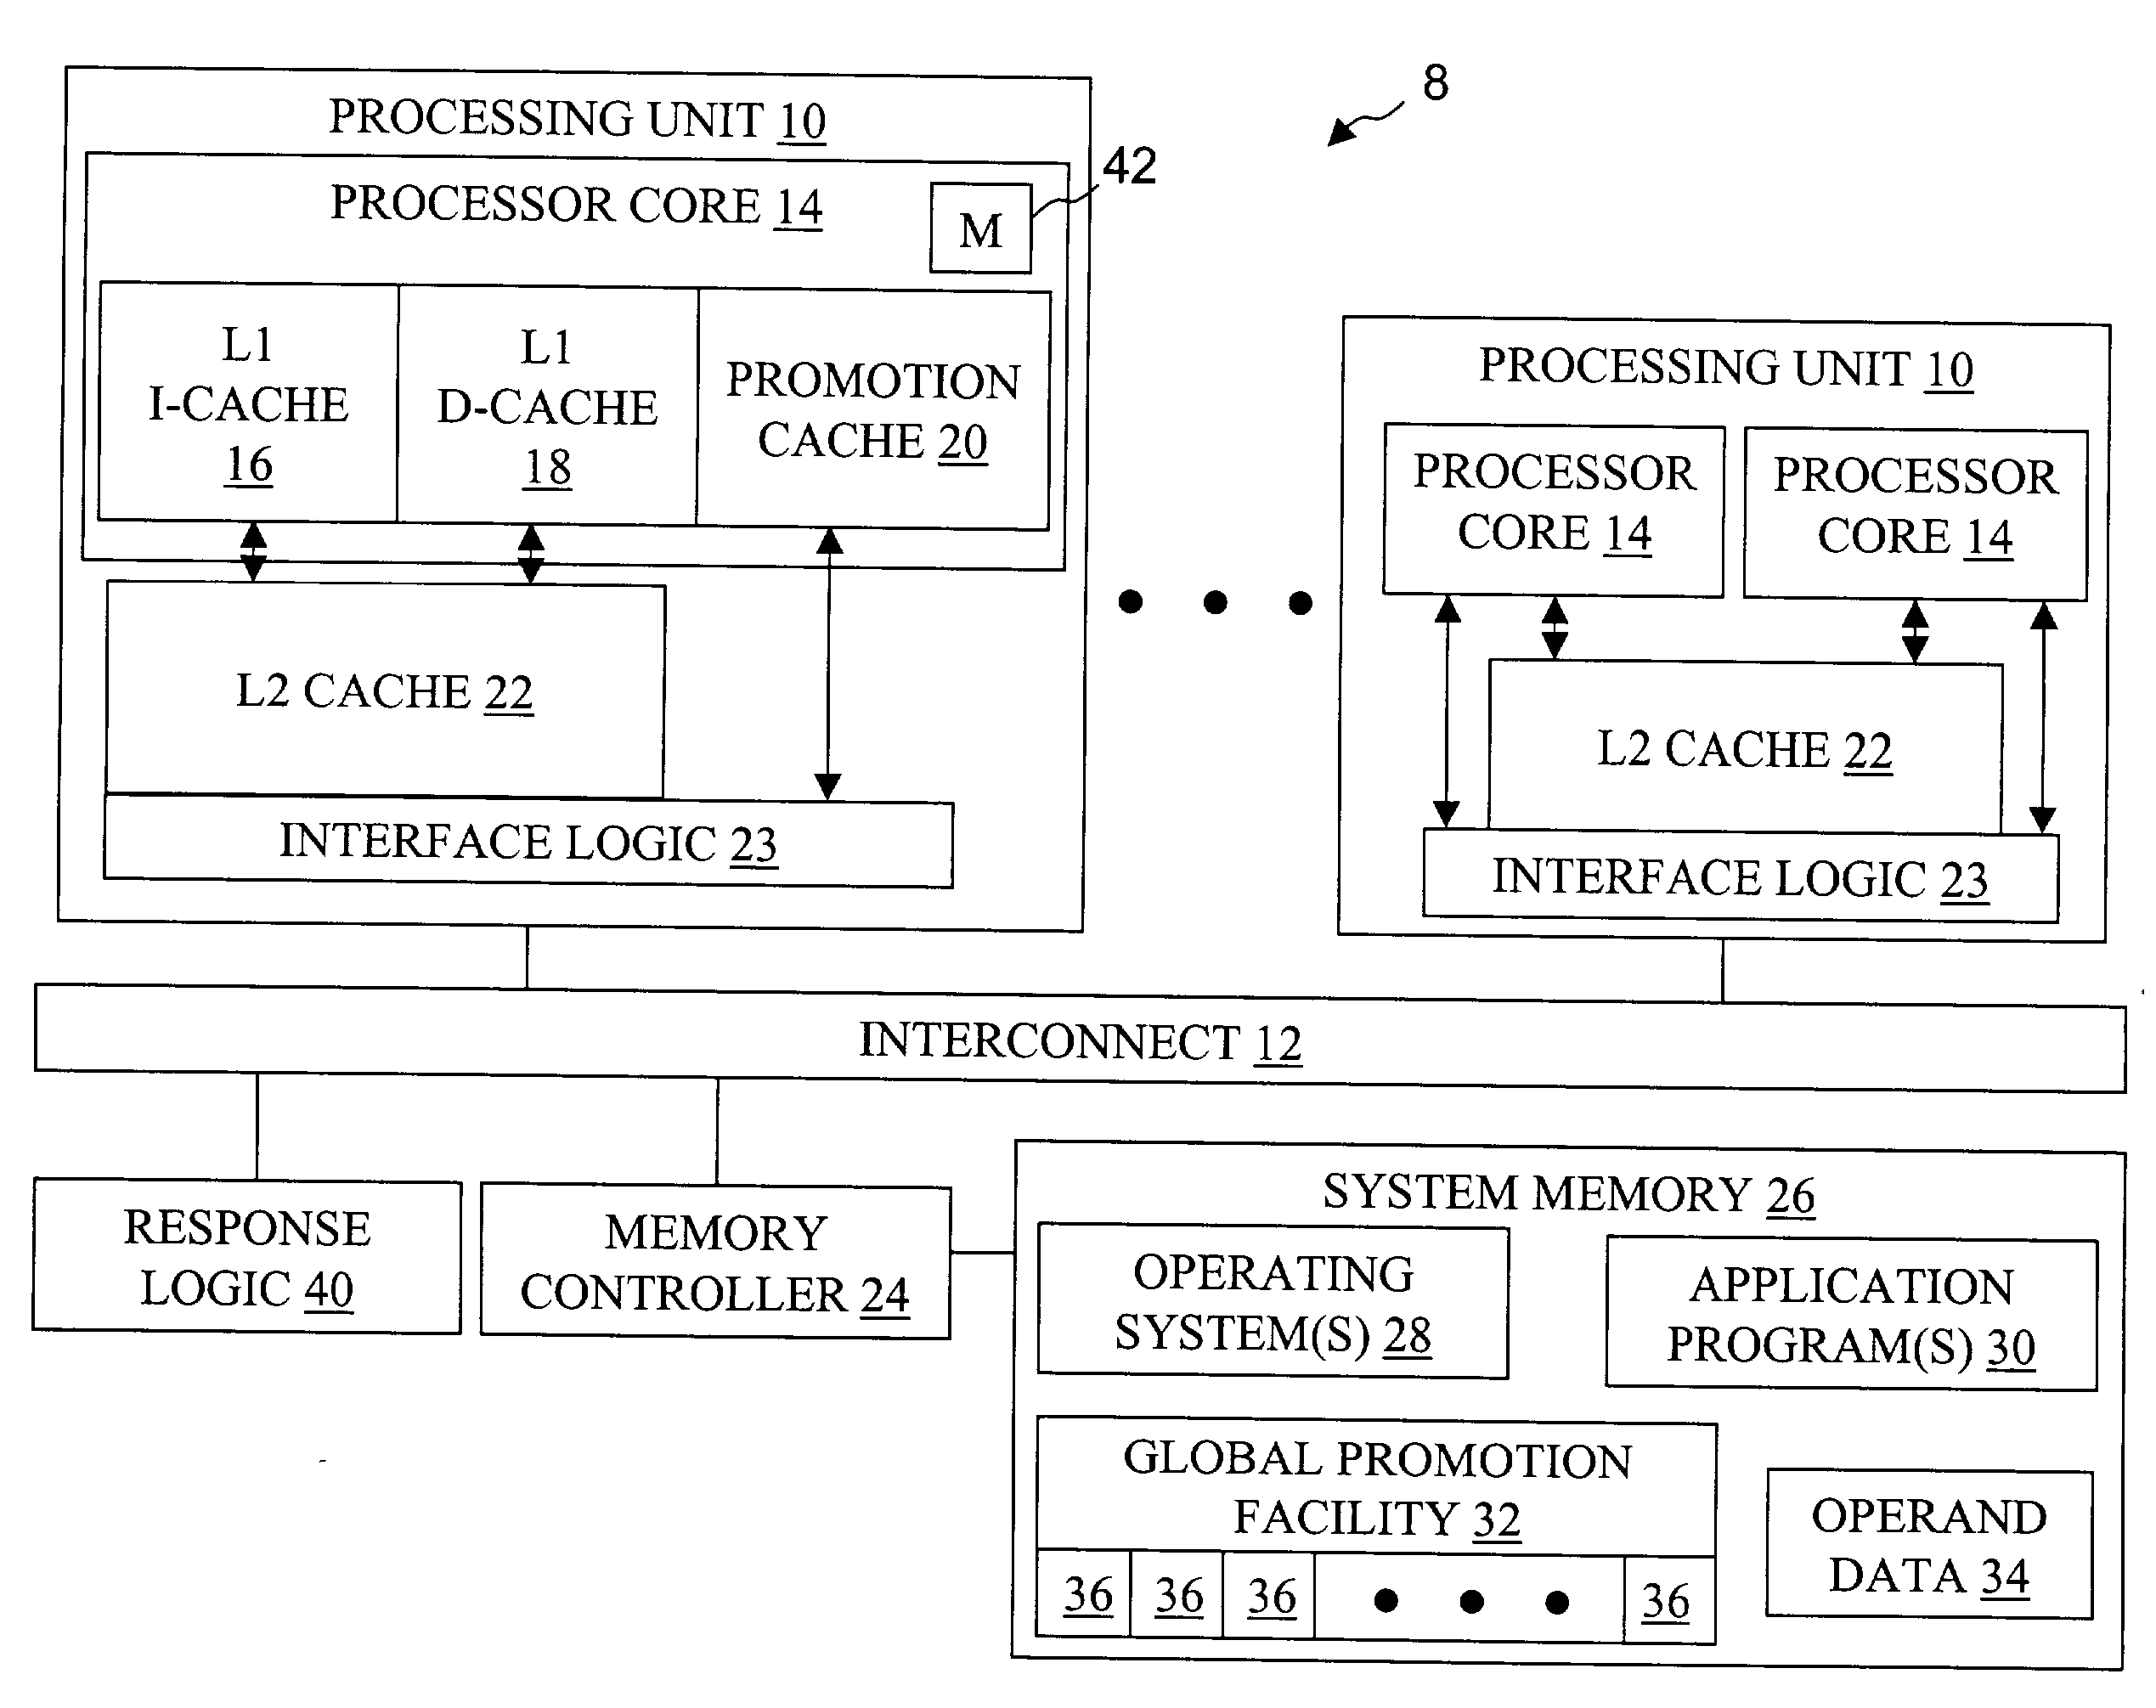 High speed promotion mechanism suitable for lock acquisition in a multiprocessor data processing system